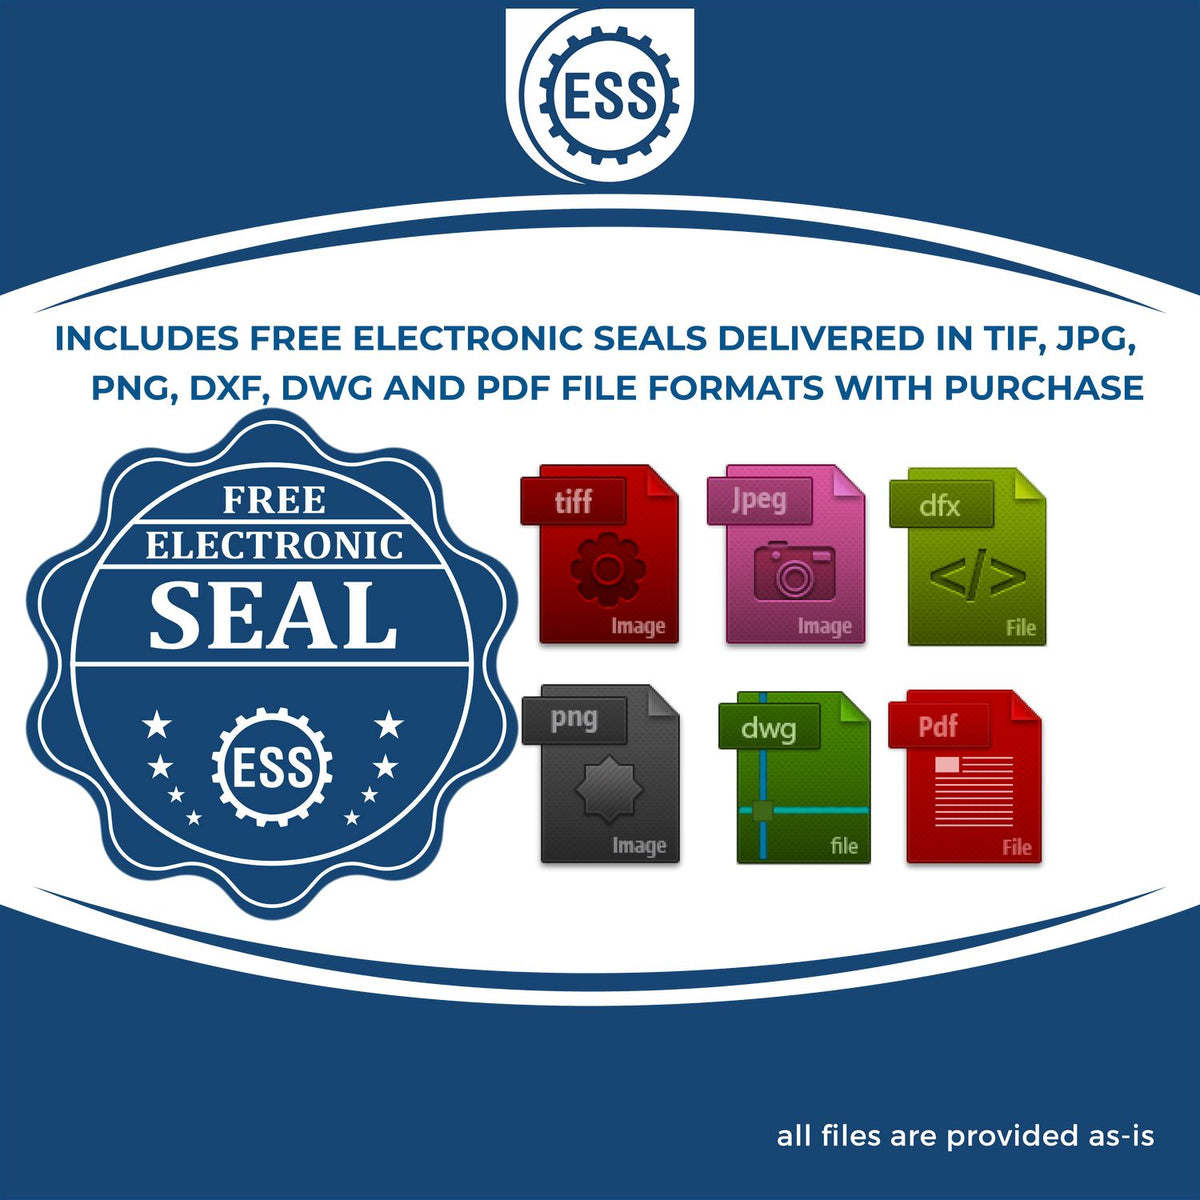 An infographic for the free electronic seal for the State of New Hampshire Long Reach Architectural Embossing Seal illustrating the different file type icons such as DXF, DWG, TIF, JPG and PNG.